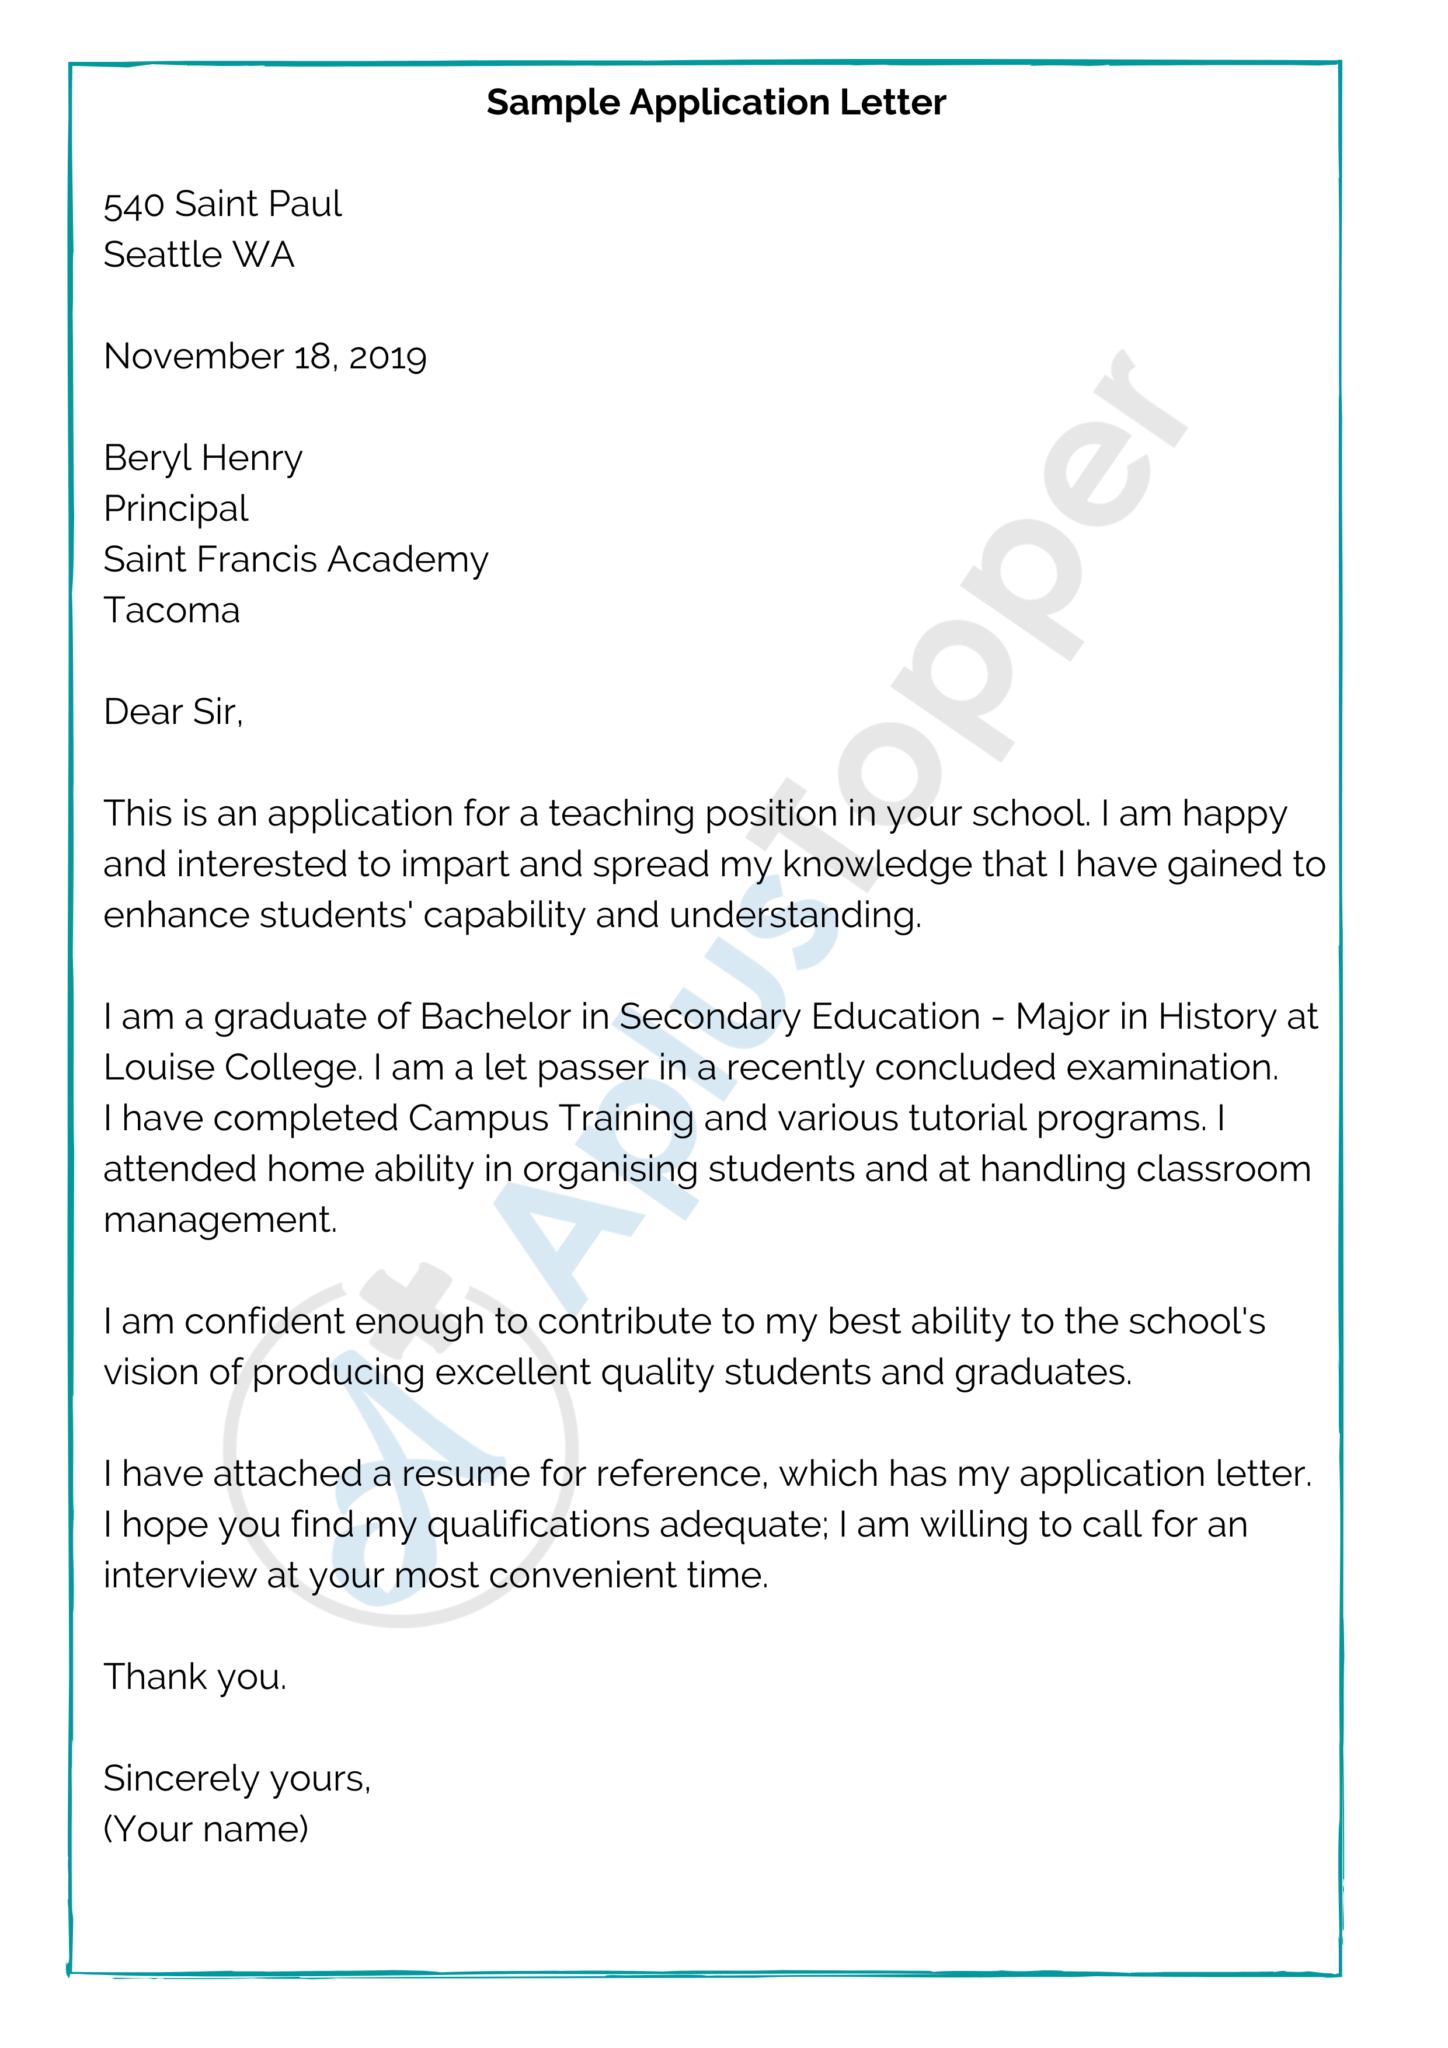 application letter sample in email